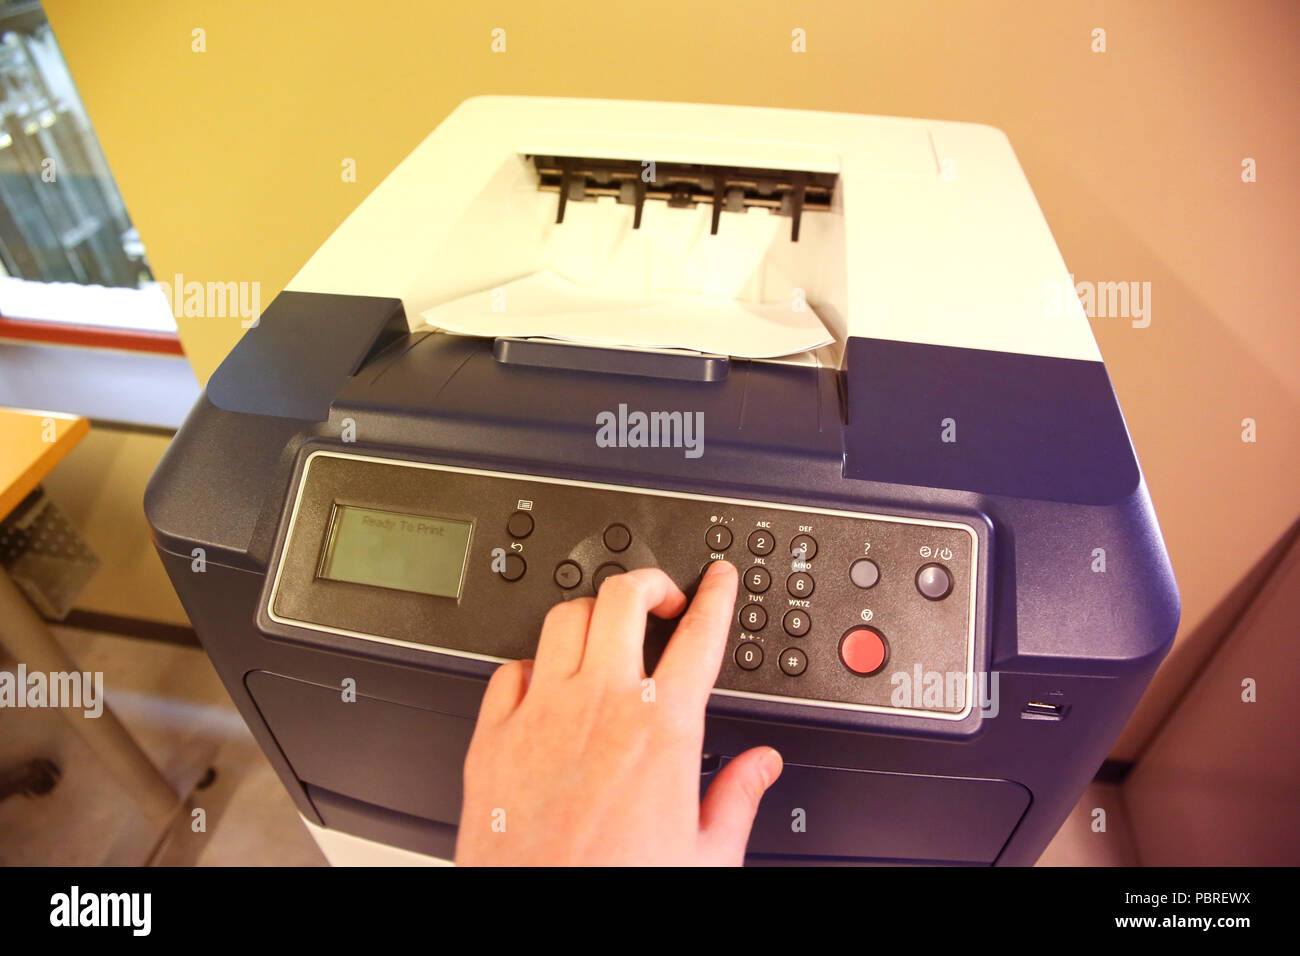 Close-up of a business assistant using a printer Stock Photo